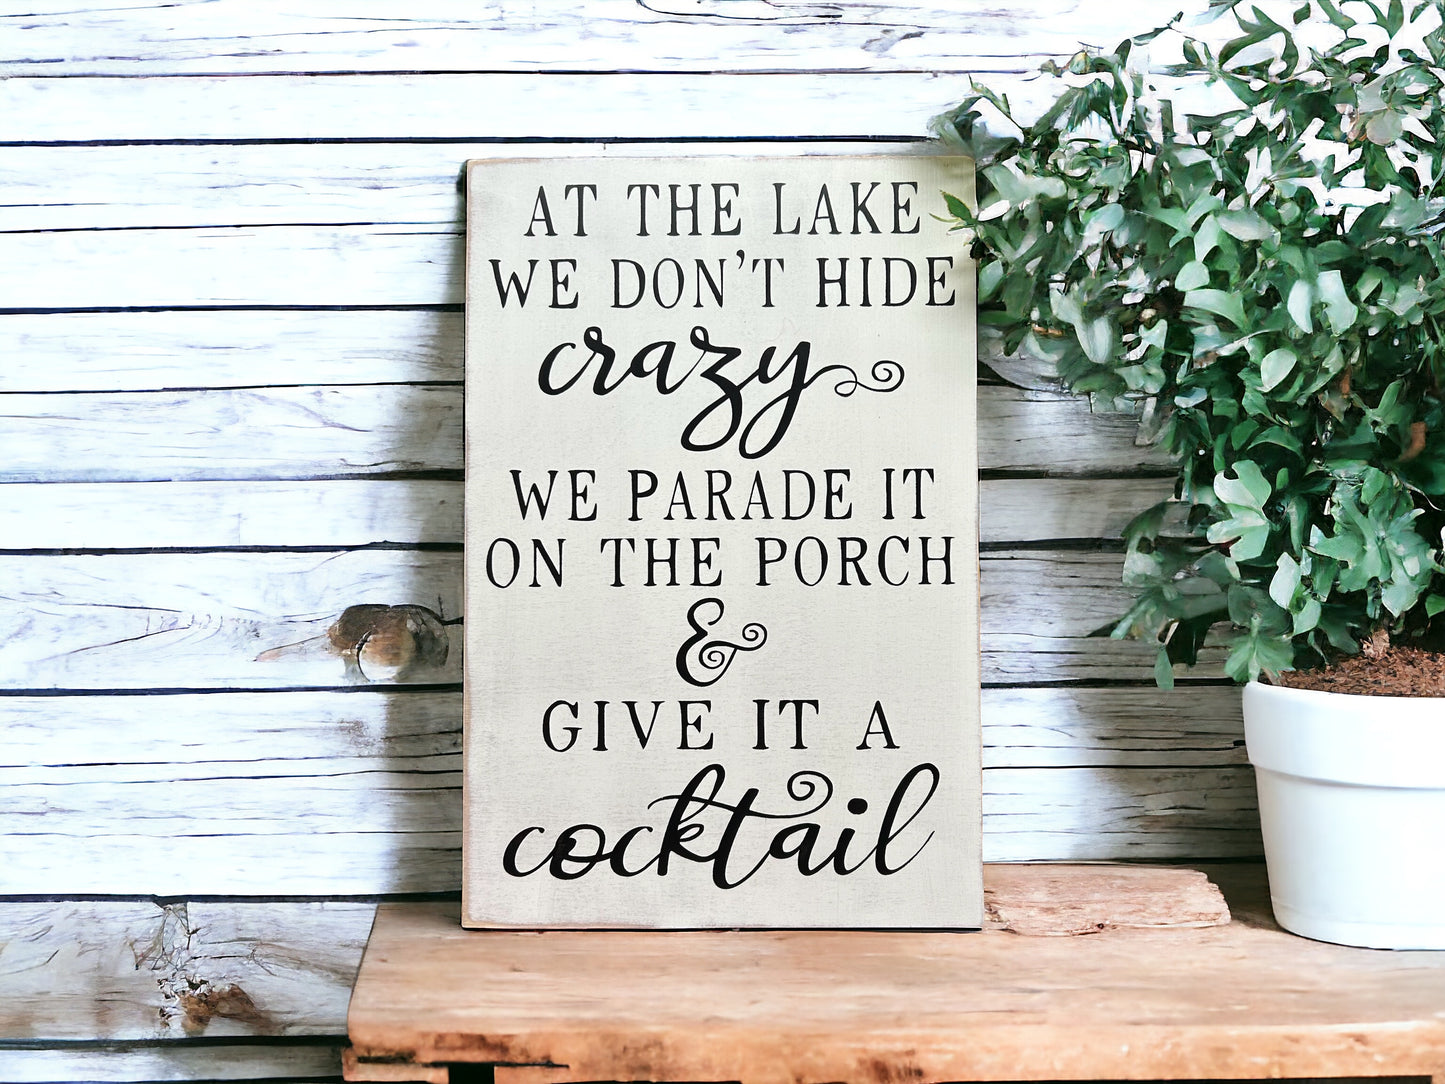 At the Lake We Don’t Hide Crazy -Rustic Wood Funny Lake Sign